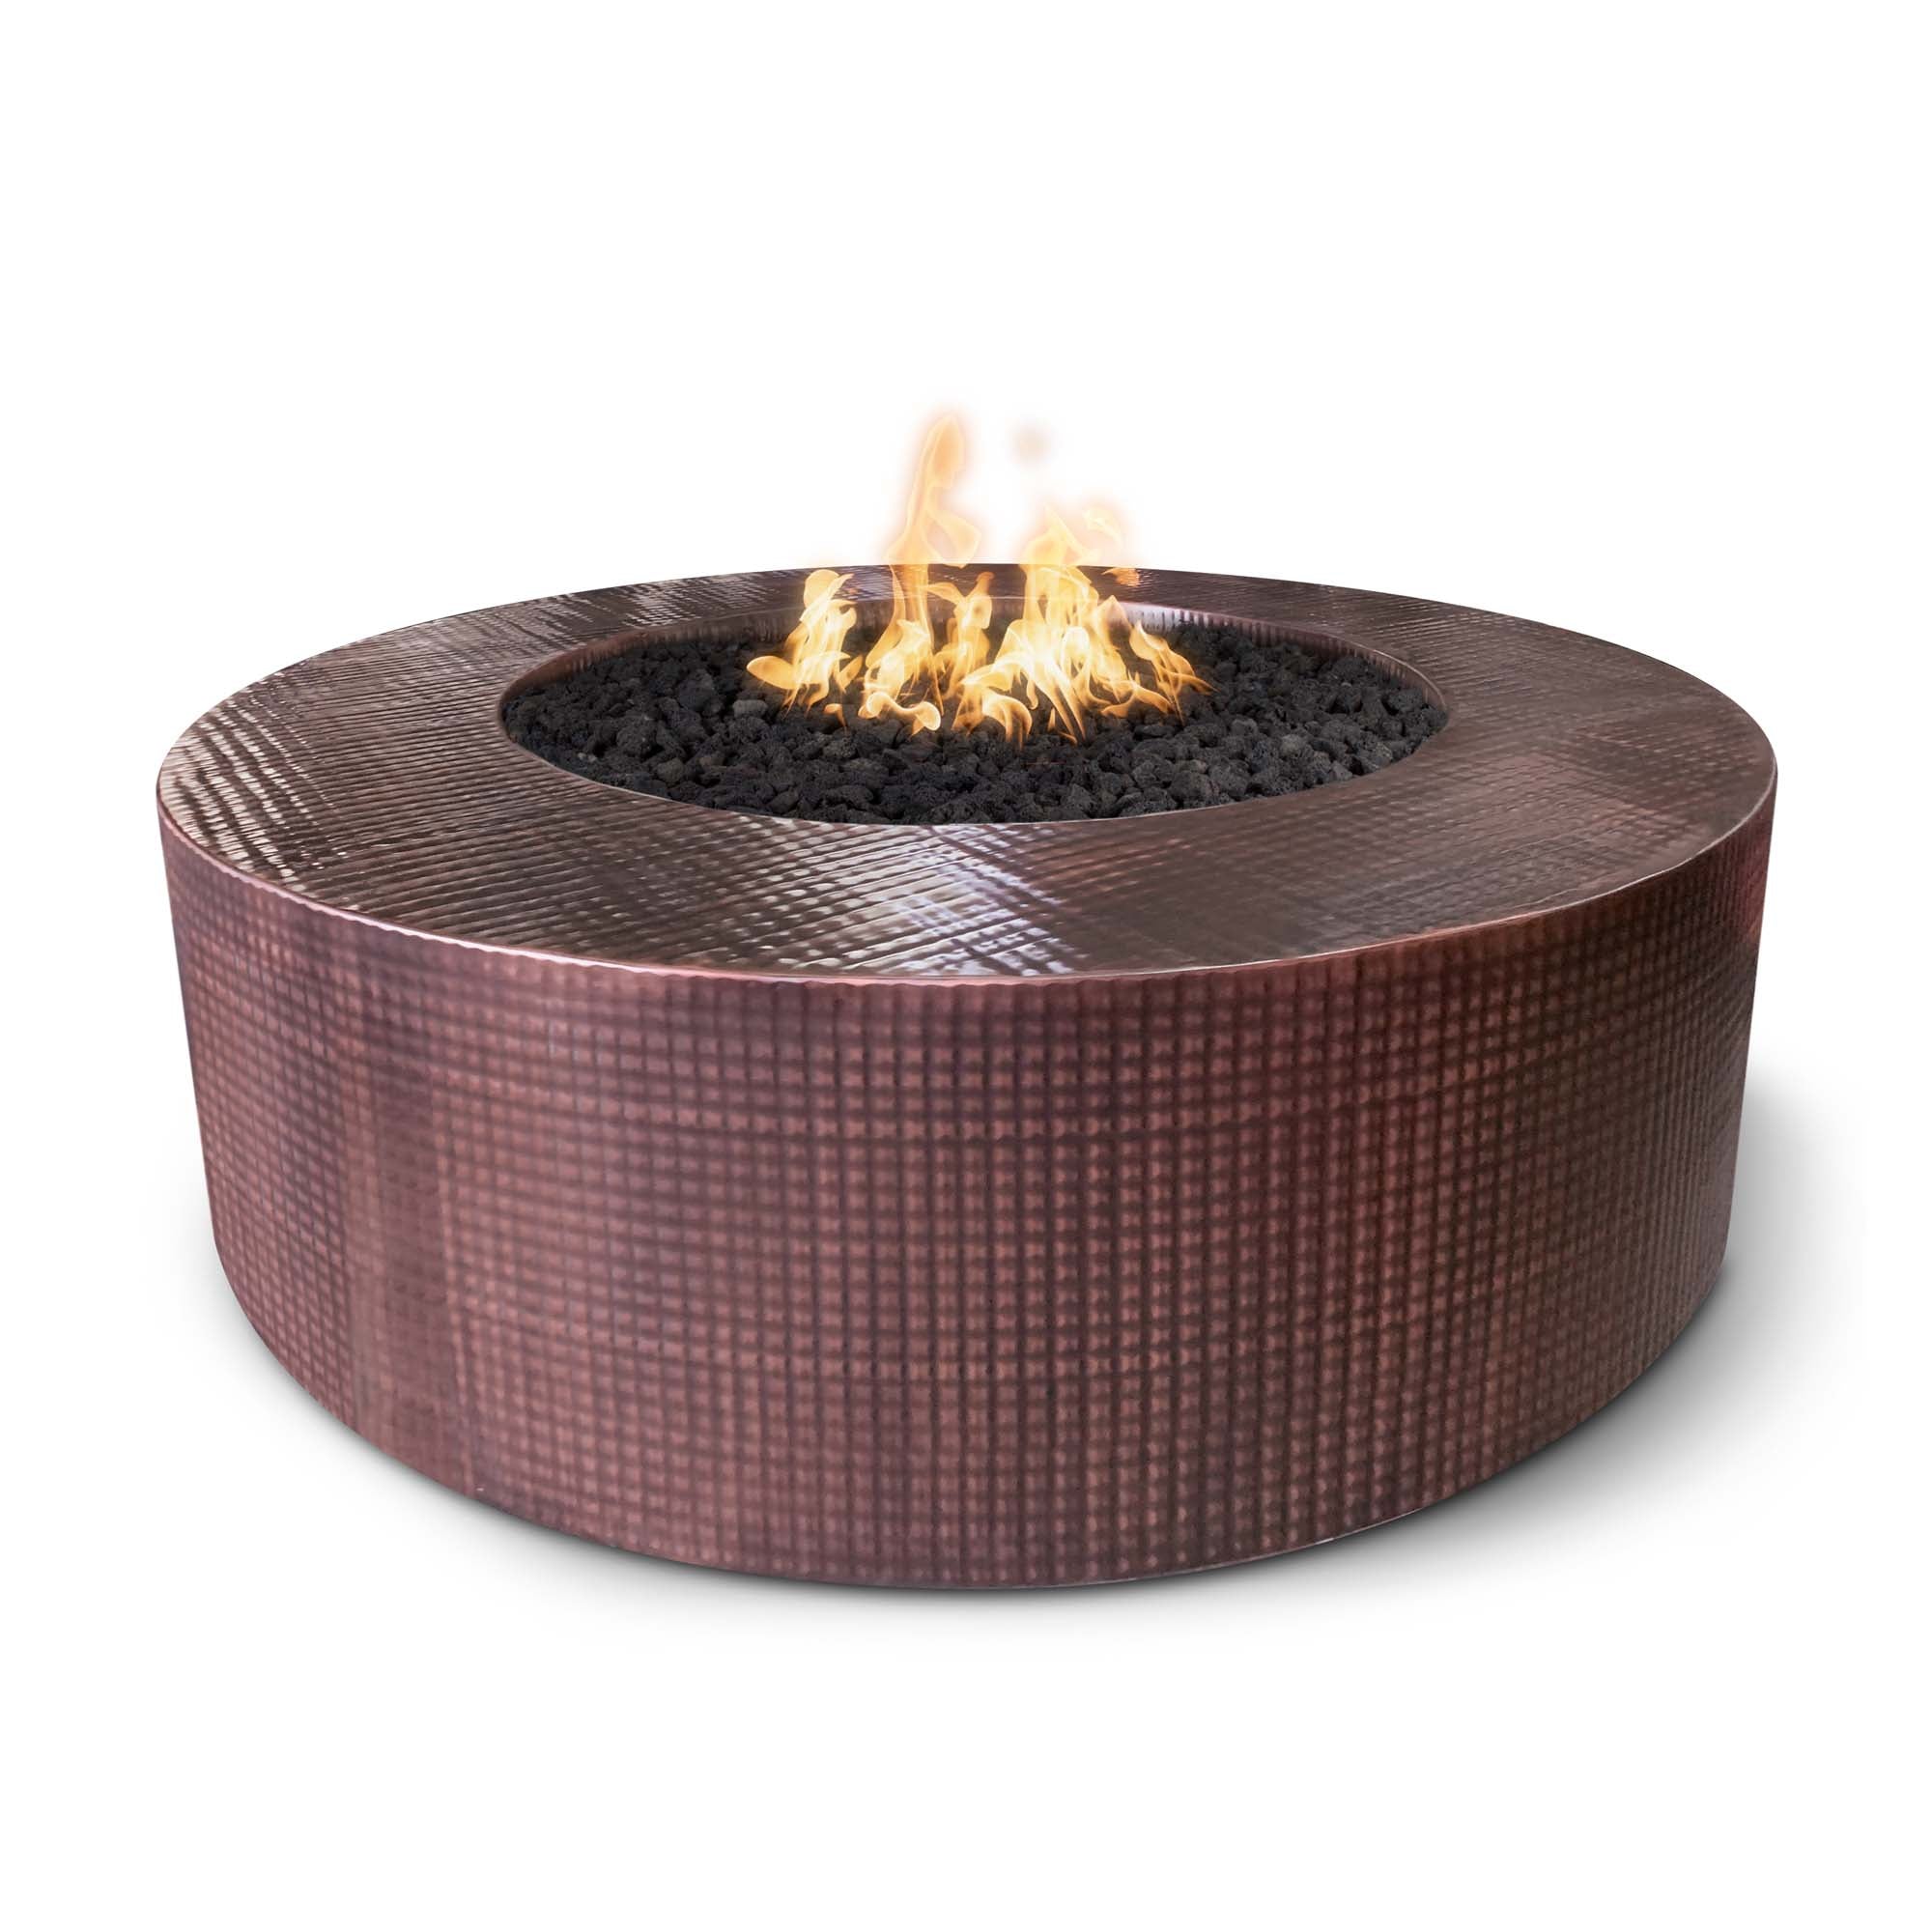 The Outdoor Plus Unity Fire Pit 24" Tall | Hammered Copper